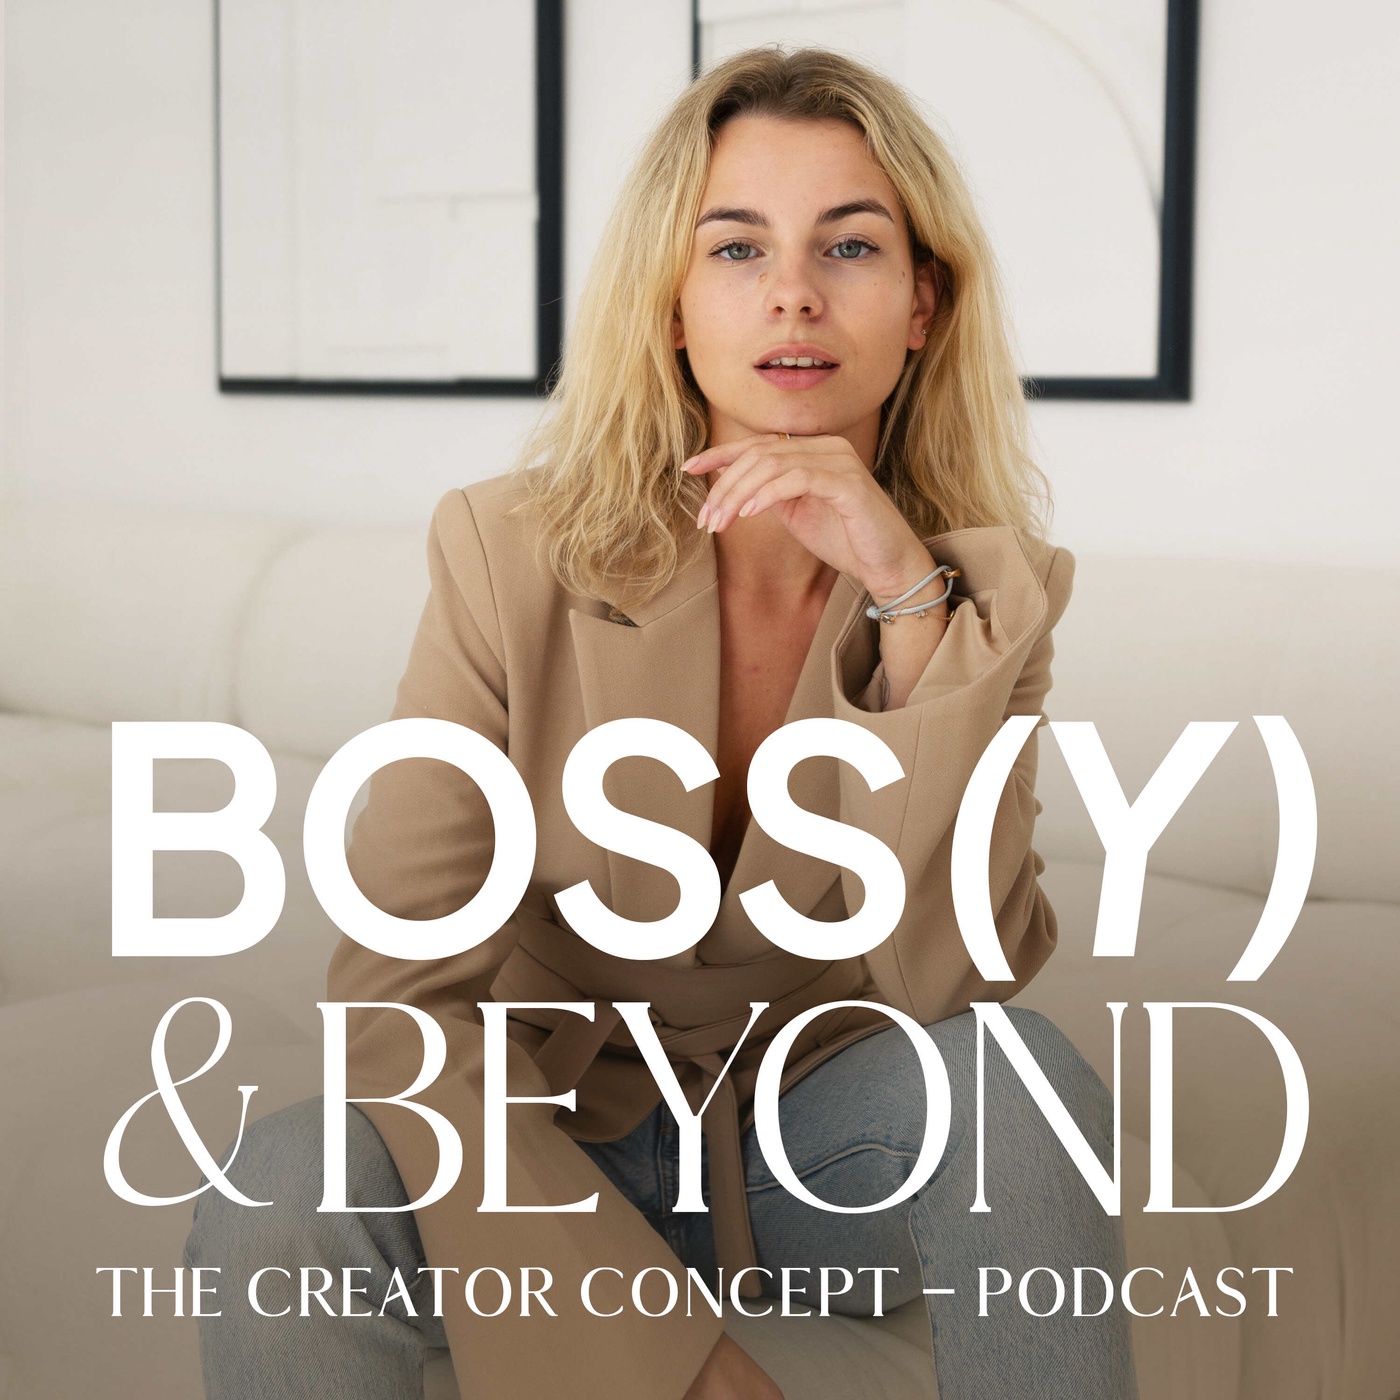 Boss(y) & Beyond - The Creator Concept Podcast | dein Onlinebusiness & Marketing Podcast